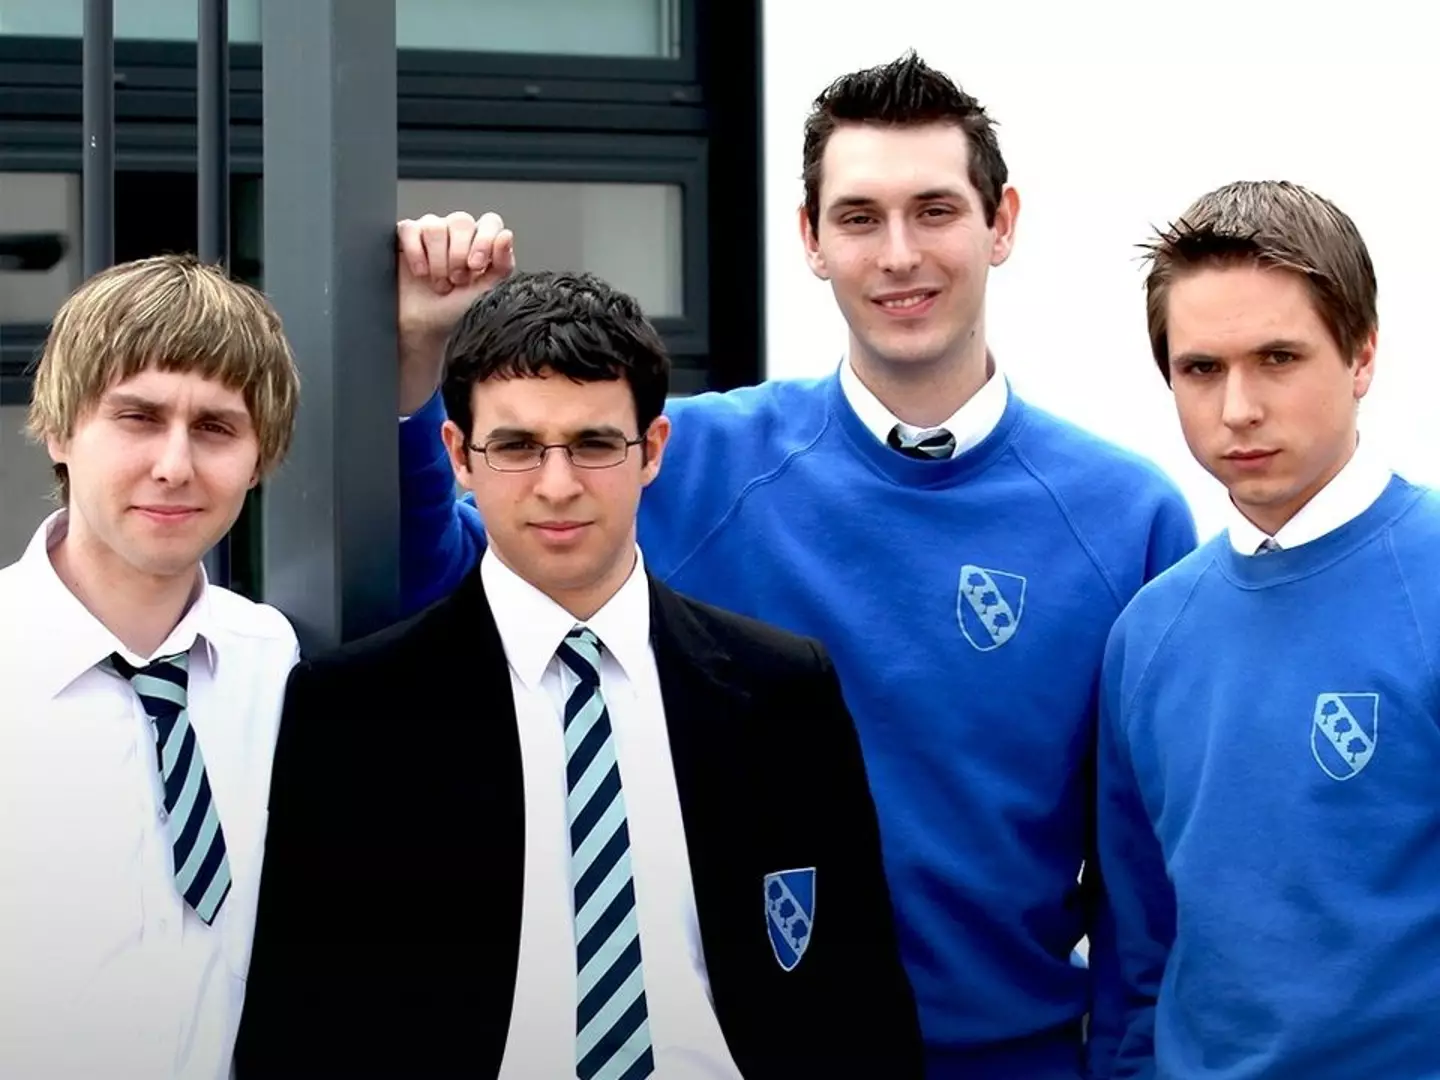 The main cast of The Inbetweeners were all in their 20s at the time.